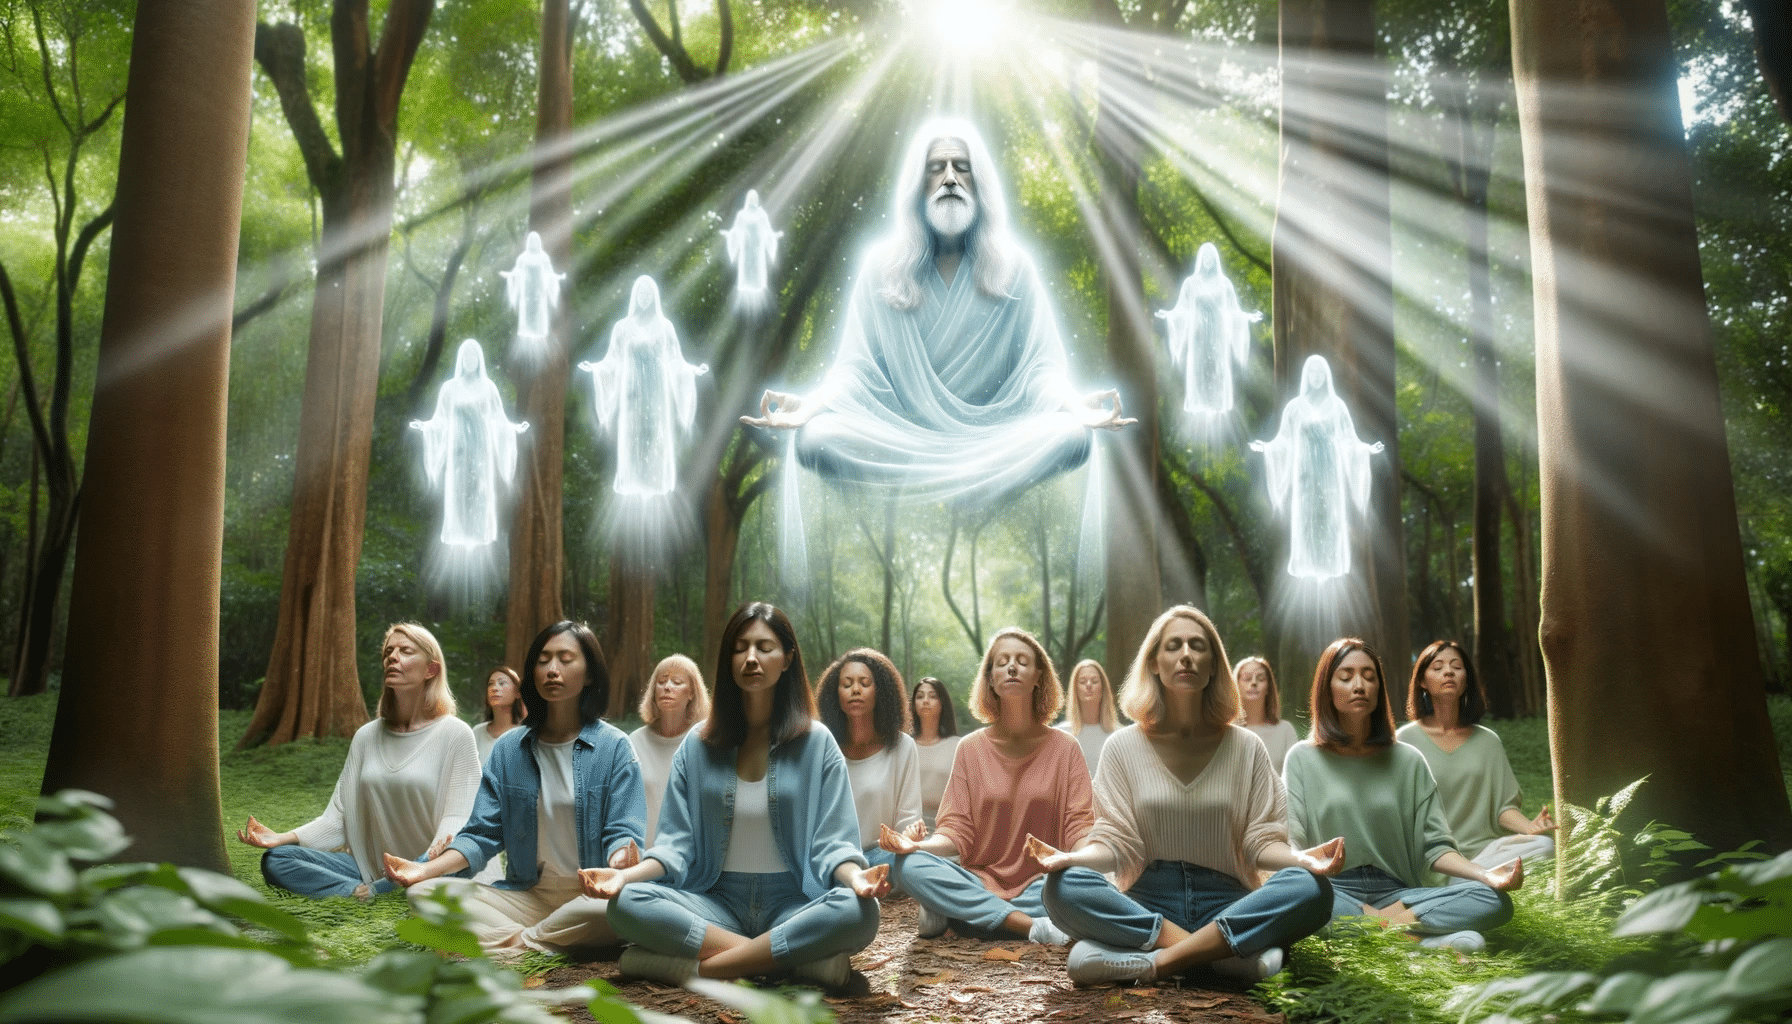 A group of people meditating in the forest.